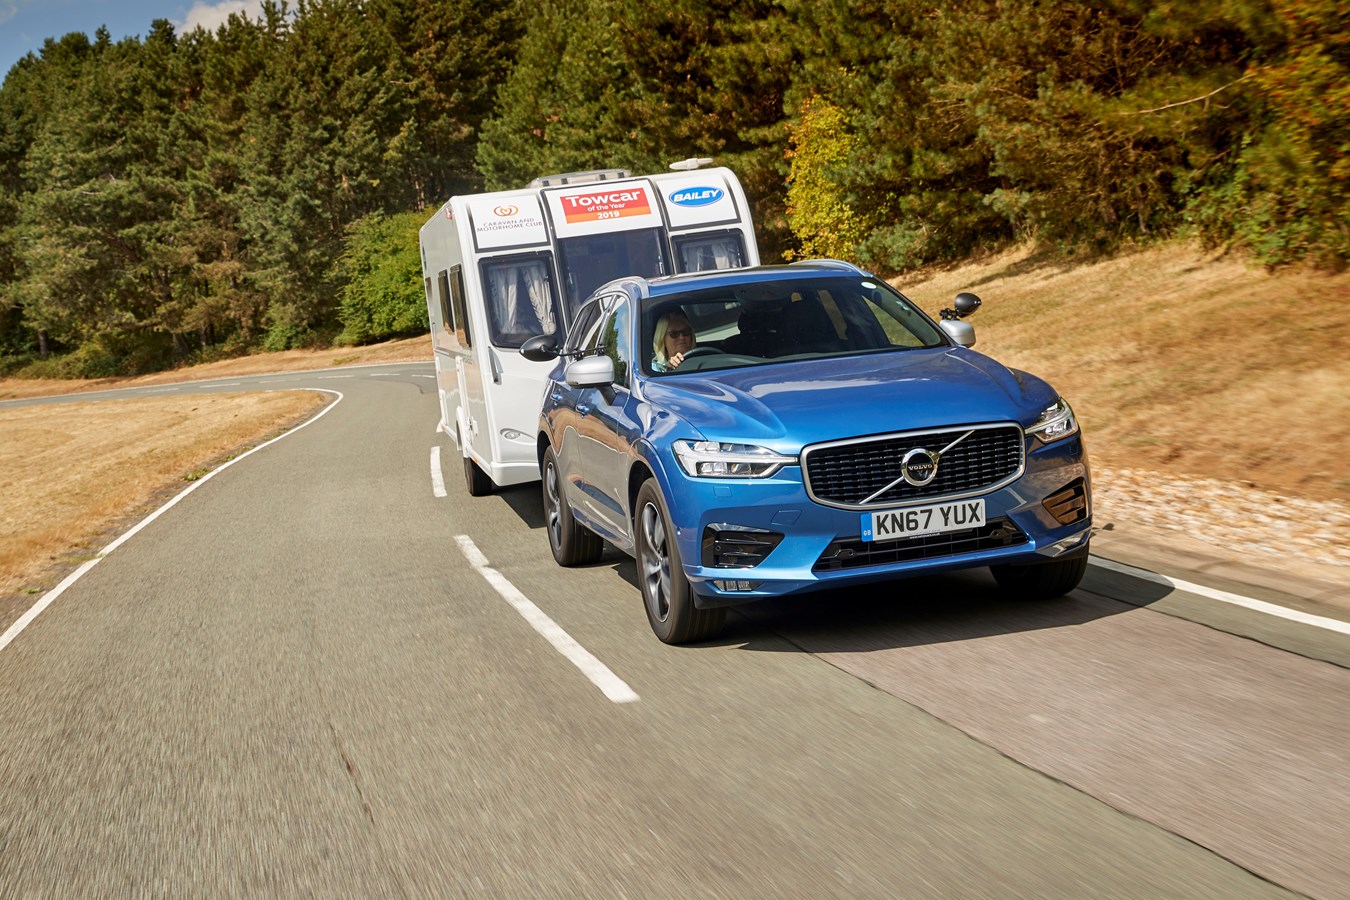 Volvo XC60 wins three titles in 2019 Caravan and Motorhome Club Towcar of the Year Competition